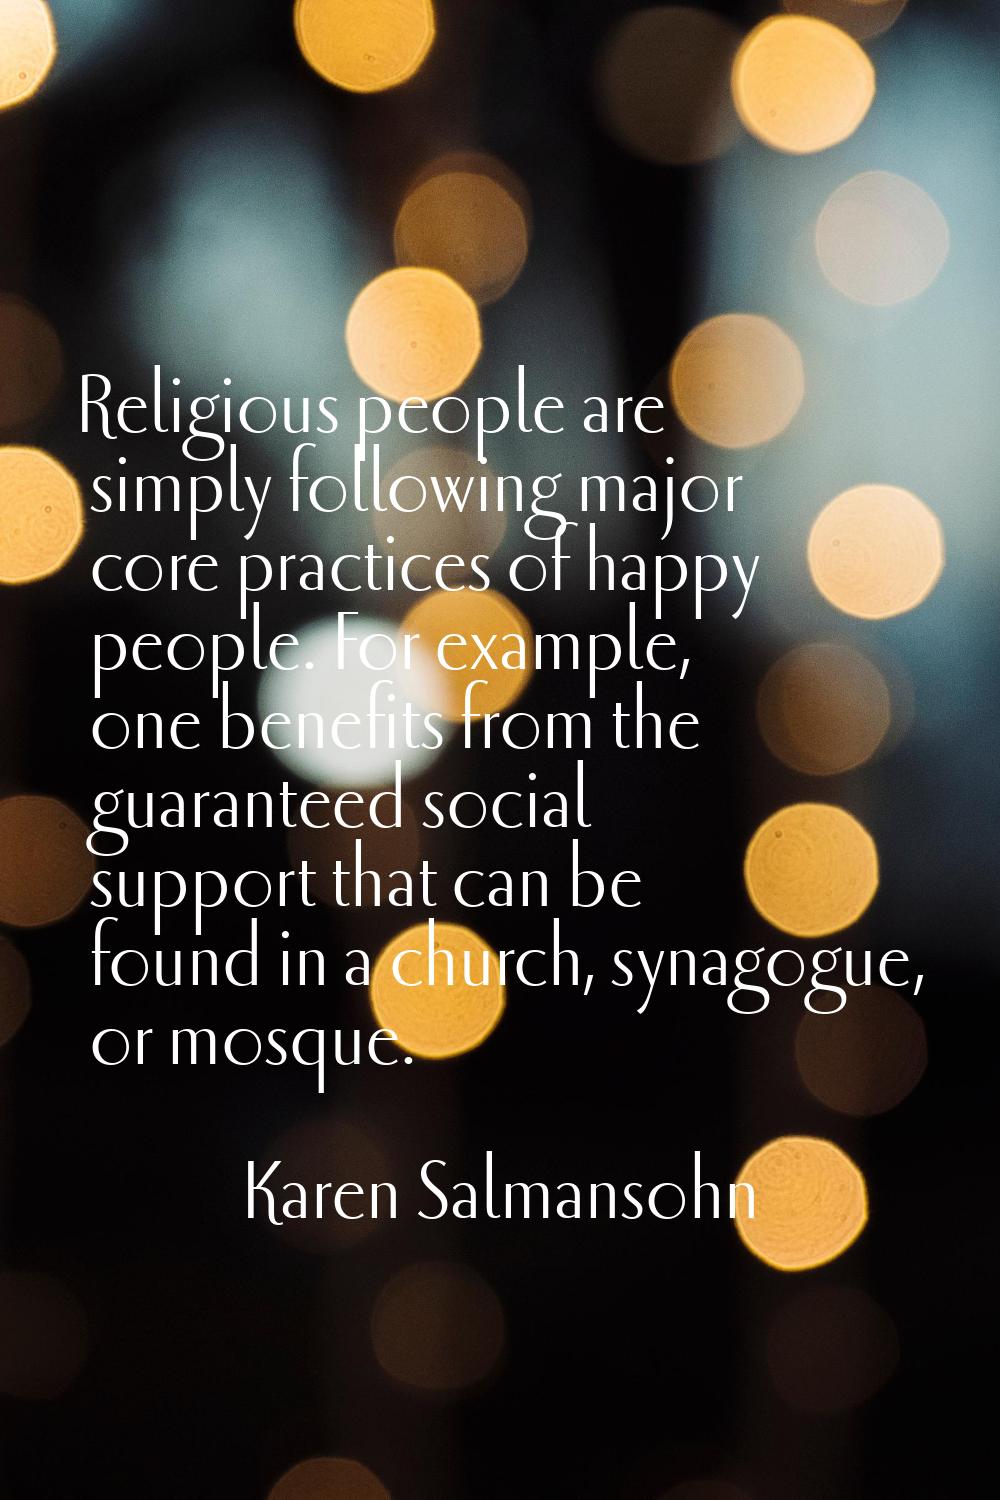 Religious people are simply following major core practices of happy people. For example, one benefi